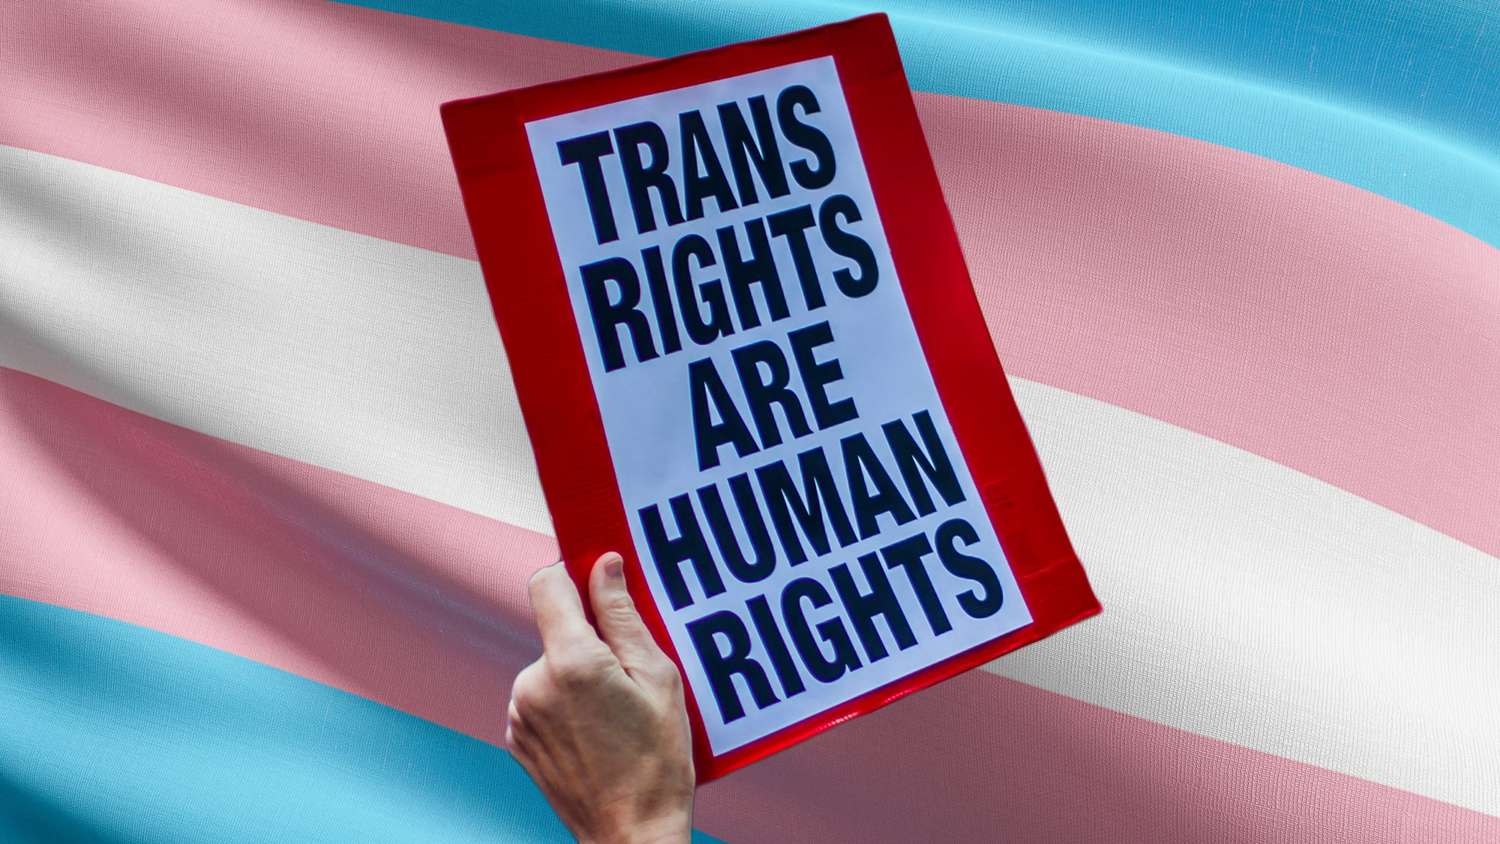 An image of a person holding a Trans rights sign on top of a Trans rights flag.